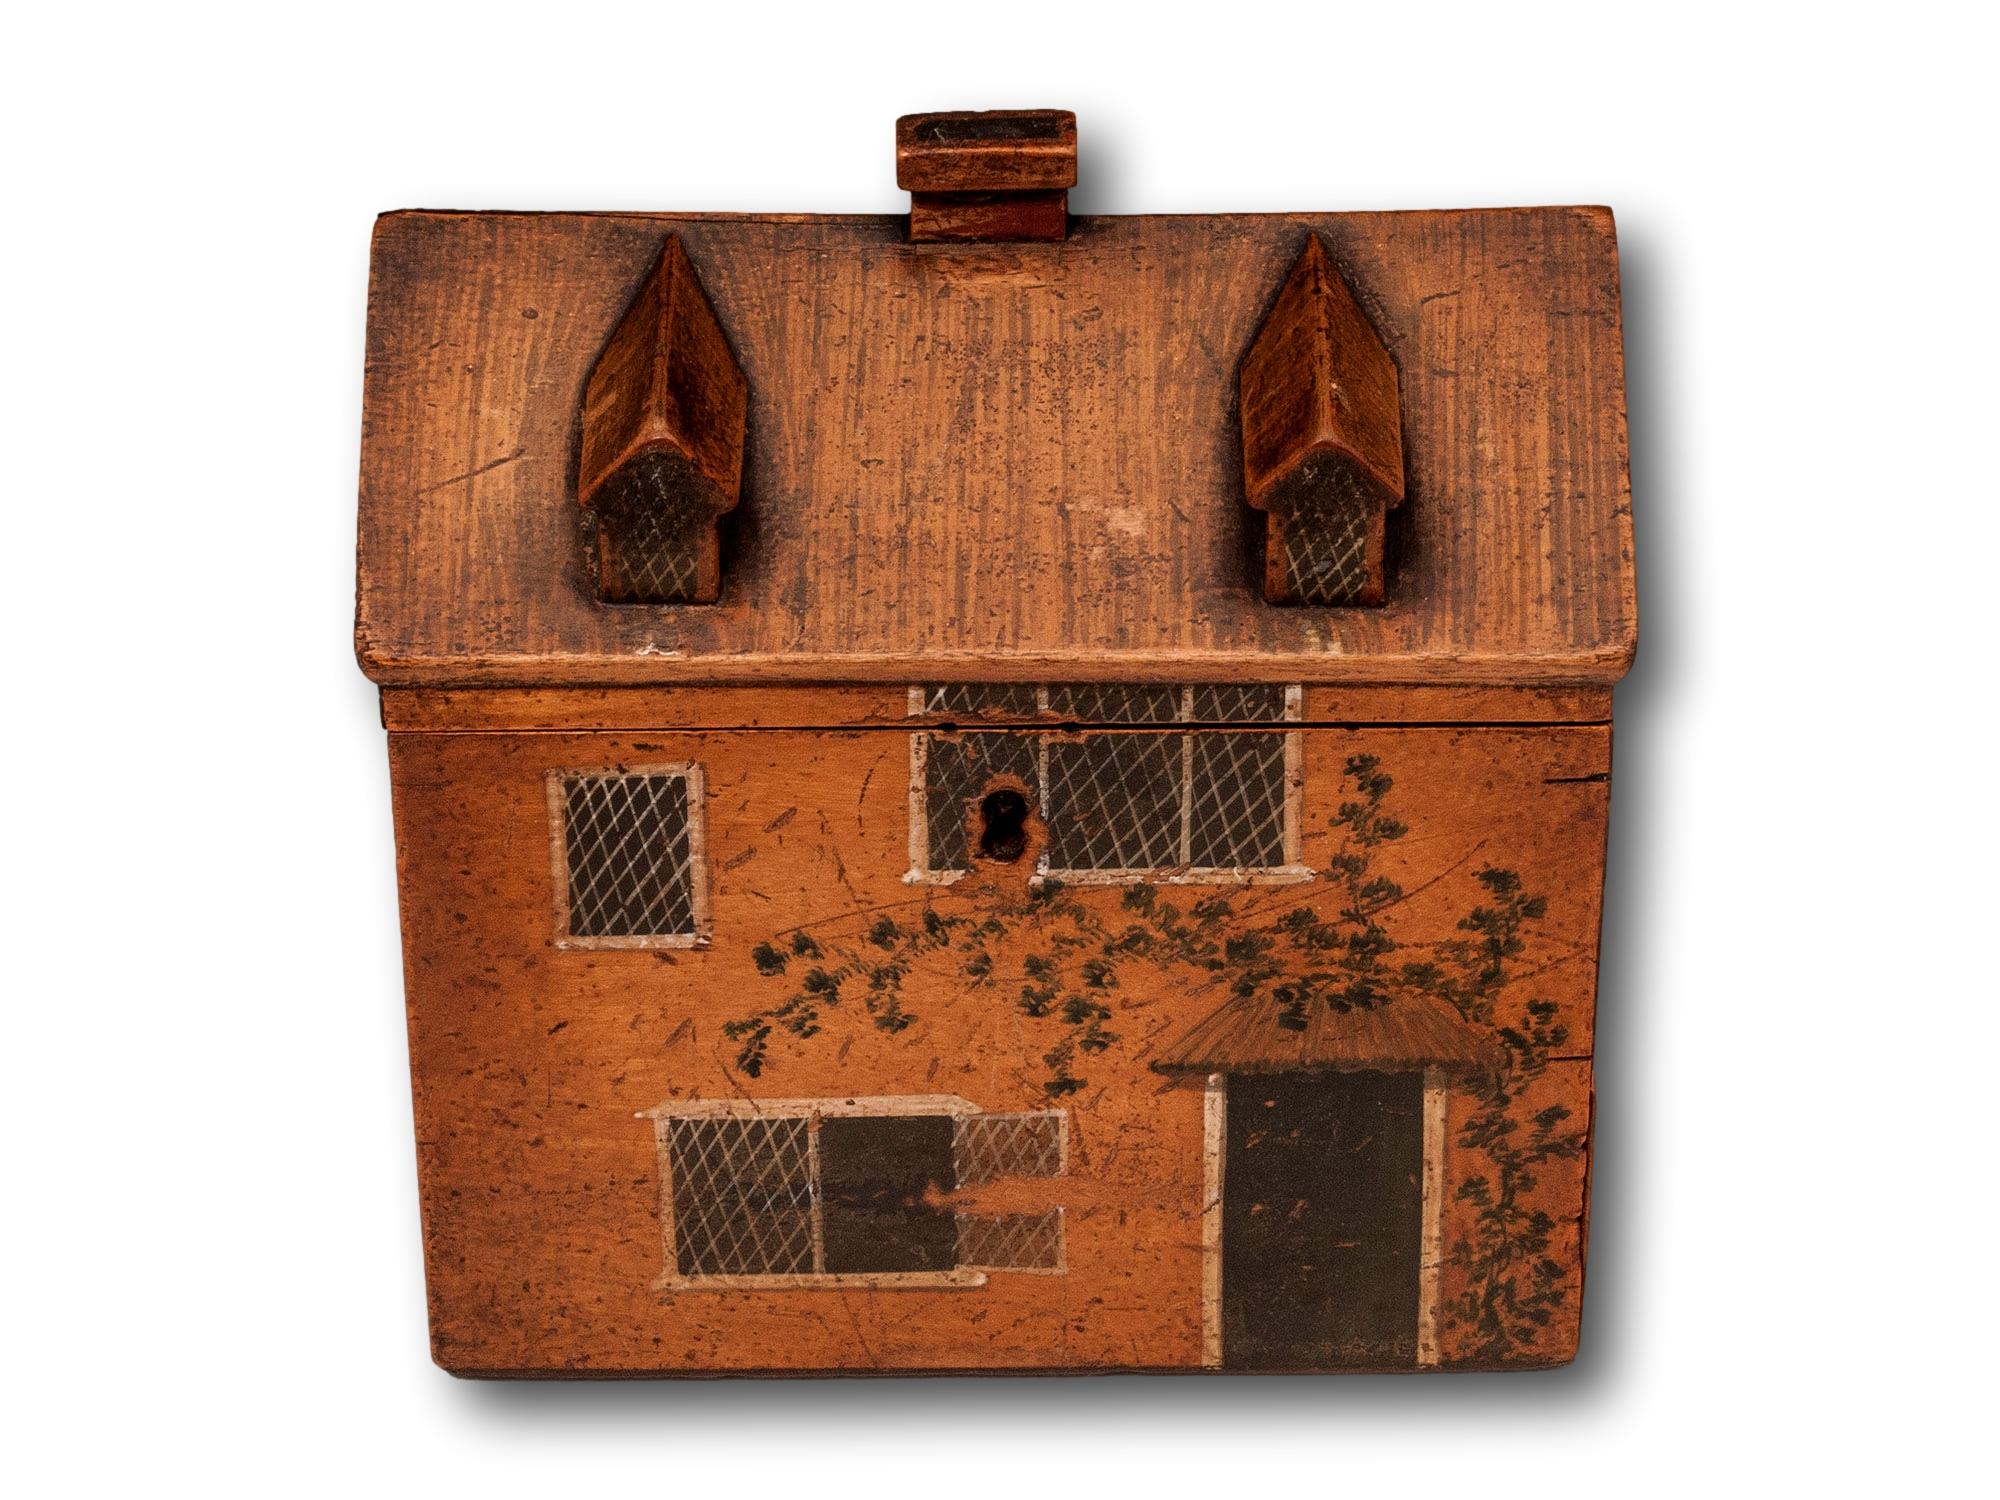 Tunbridge Ware Folk House Sewing Box

From our Sewing Box collection, we are thrilled to offer this Novelty Folk Art Cottage Sewing Box. The box of rectangular form made from Sycamore wood and modelled as a cottage with an apex roof, chimney and